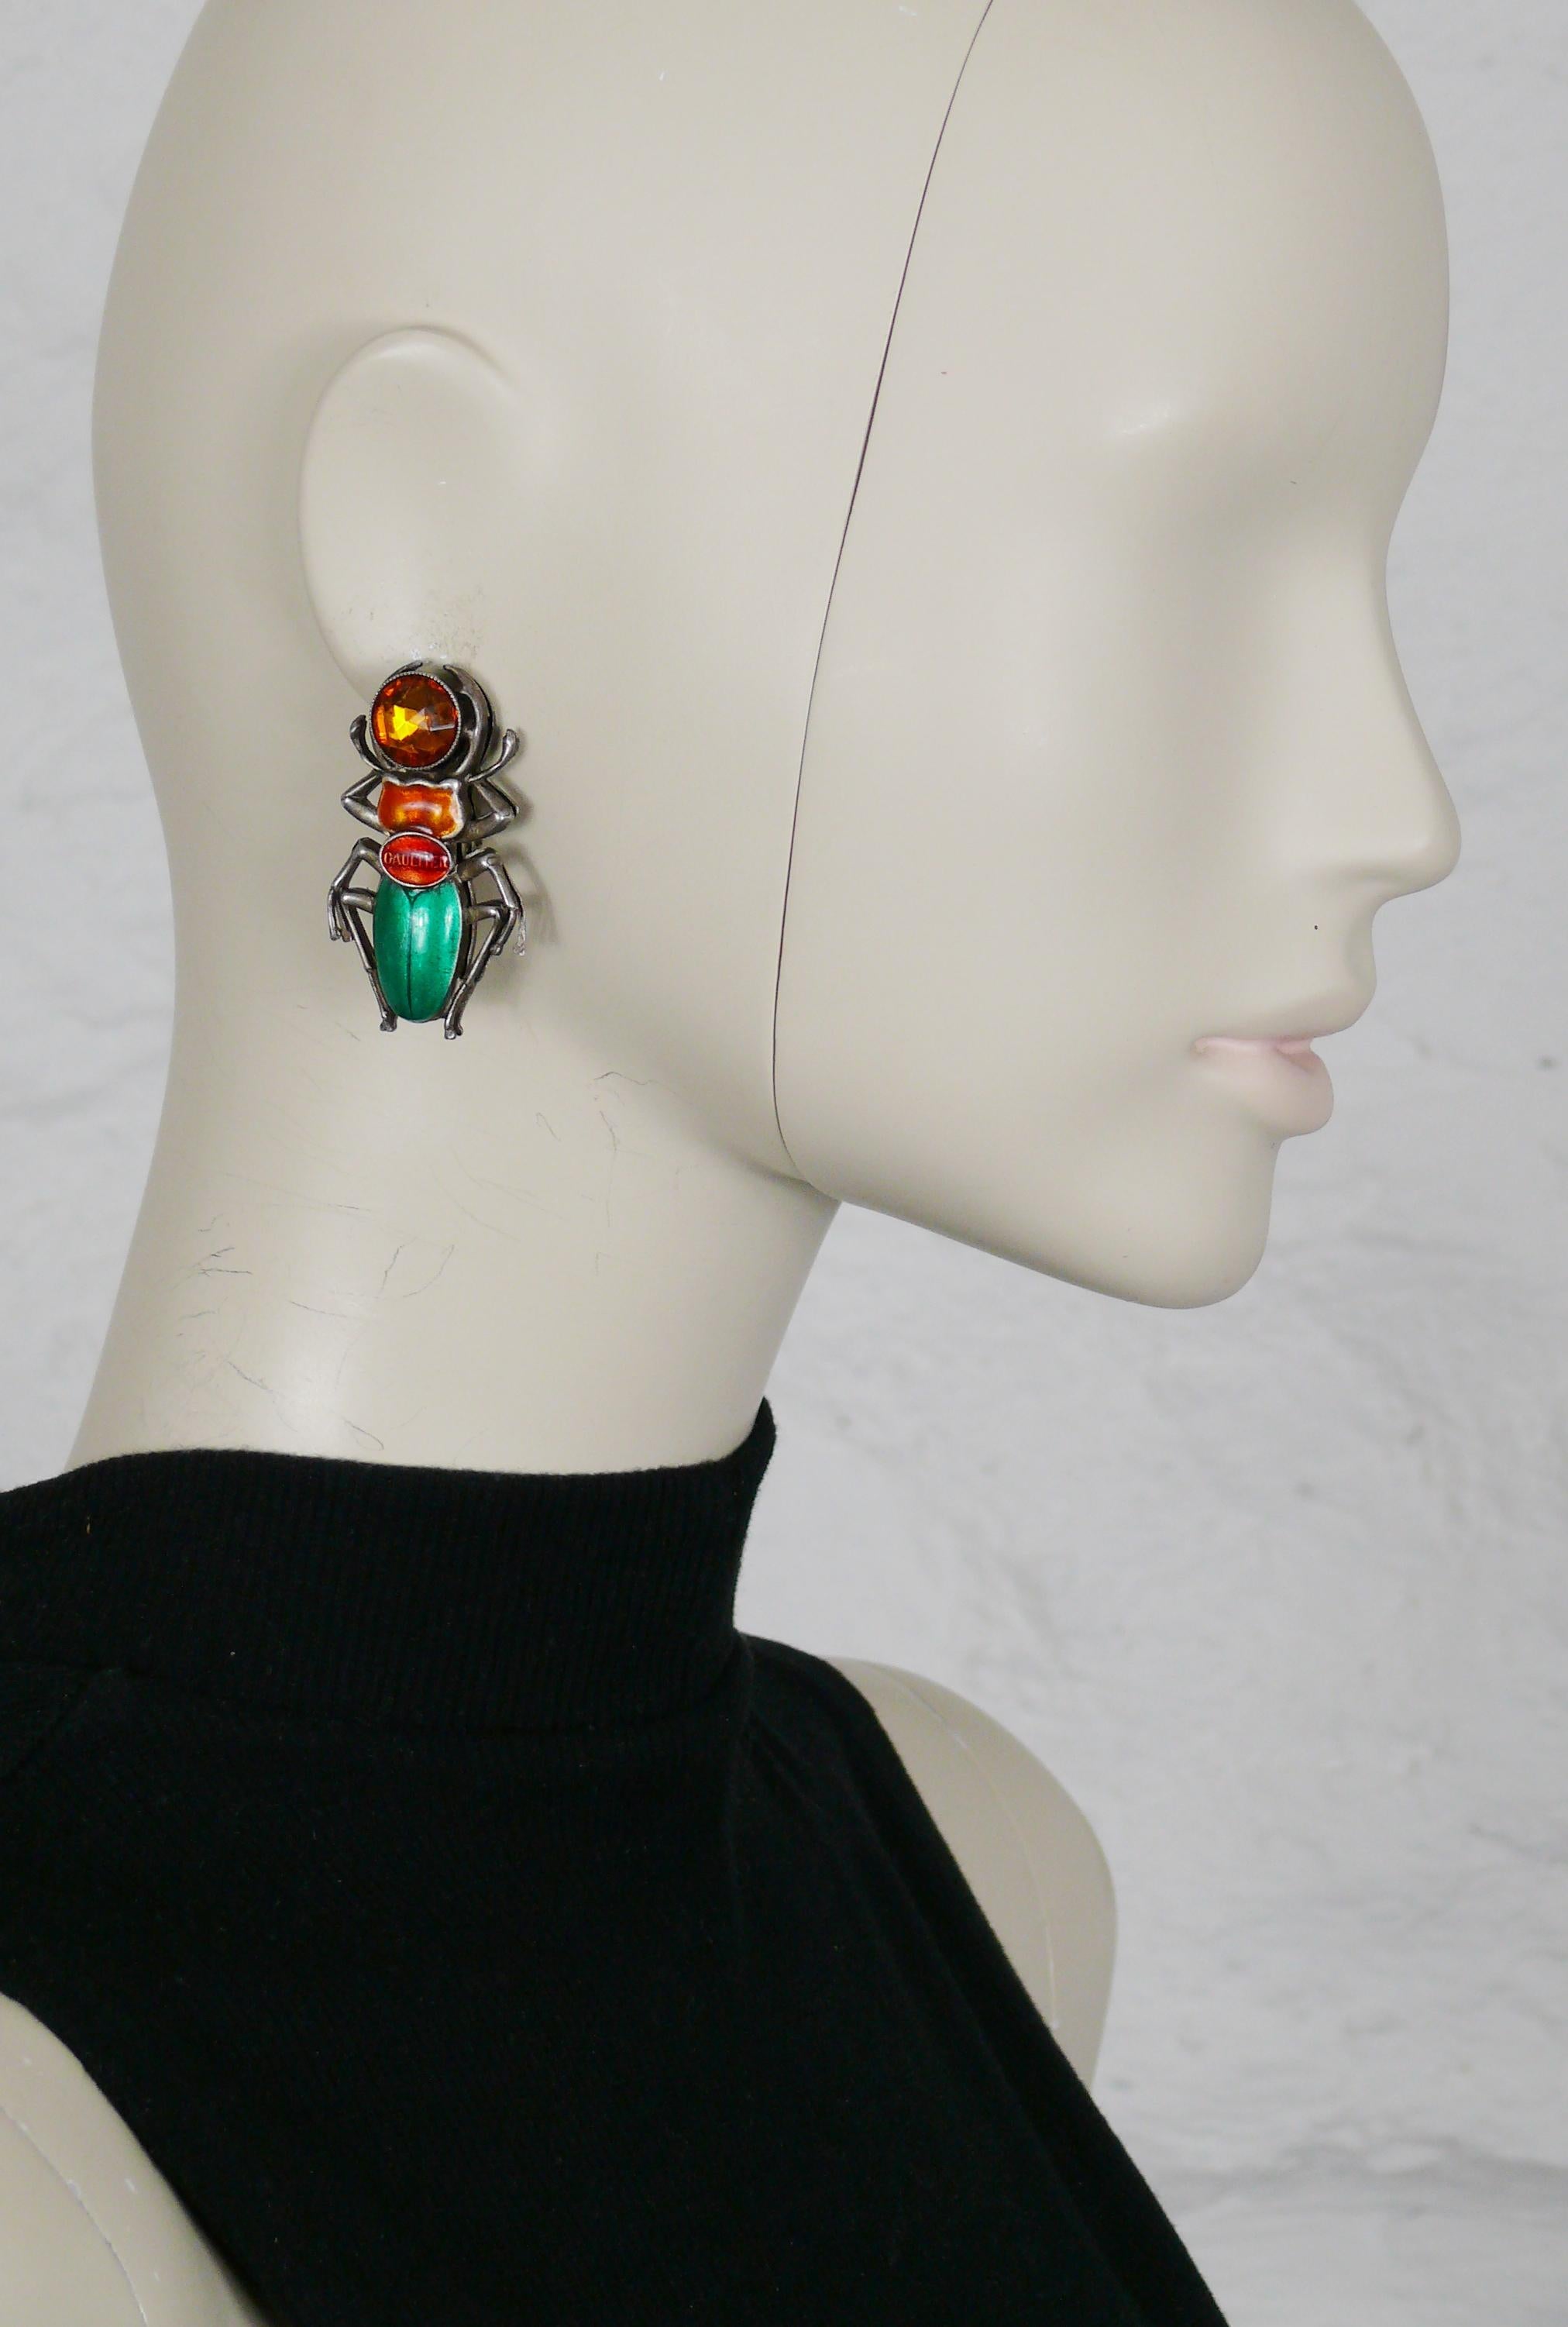 JEAN PAUL GAULTIER vintage antiqued silver toned clip-on earrings featuring an enameled scarab embellished with a citrine color crystal.

Marked GAULTIER.

Indicative measurements : height approx. 4.7 cm (1.85 inches) / max. width approx. 2.5 cm